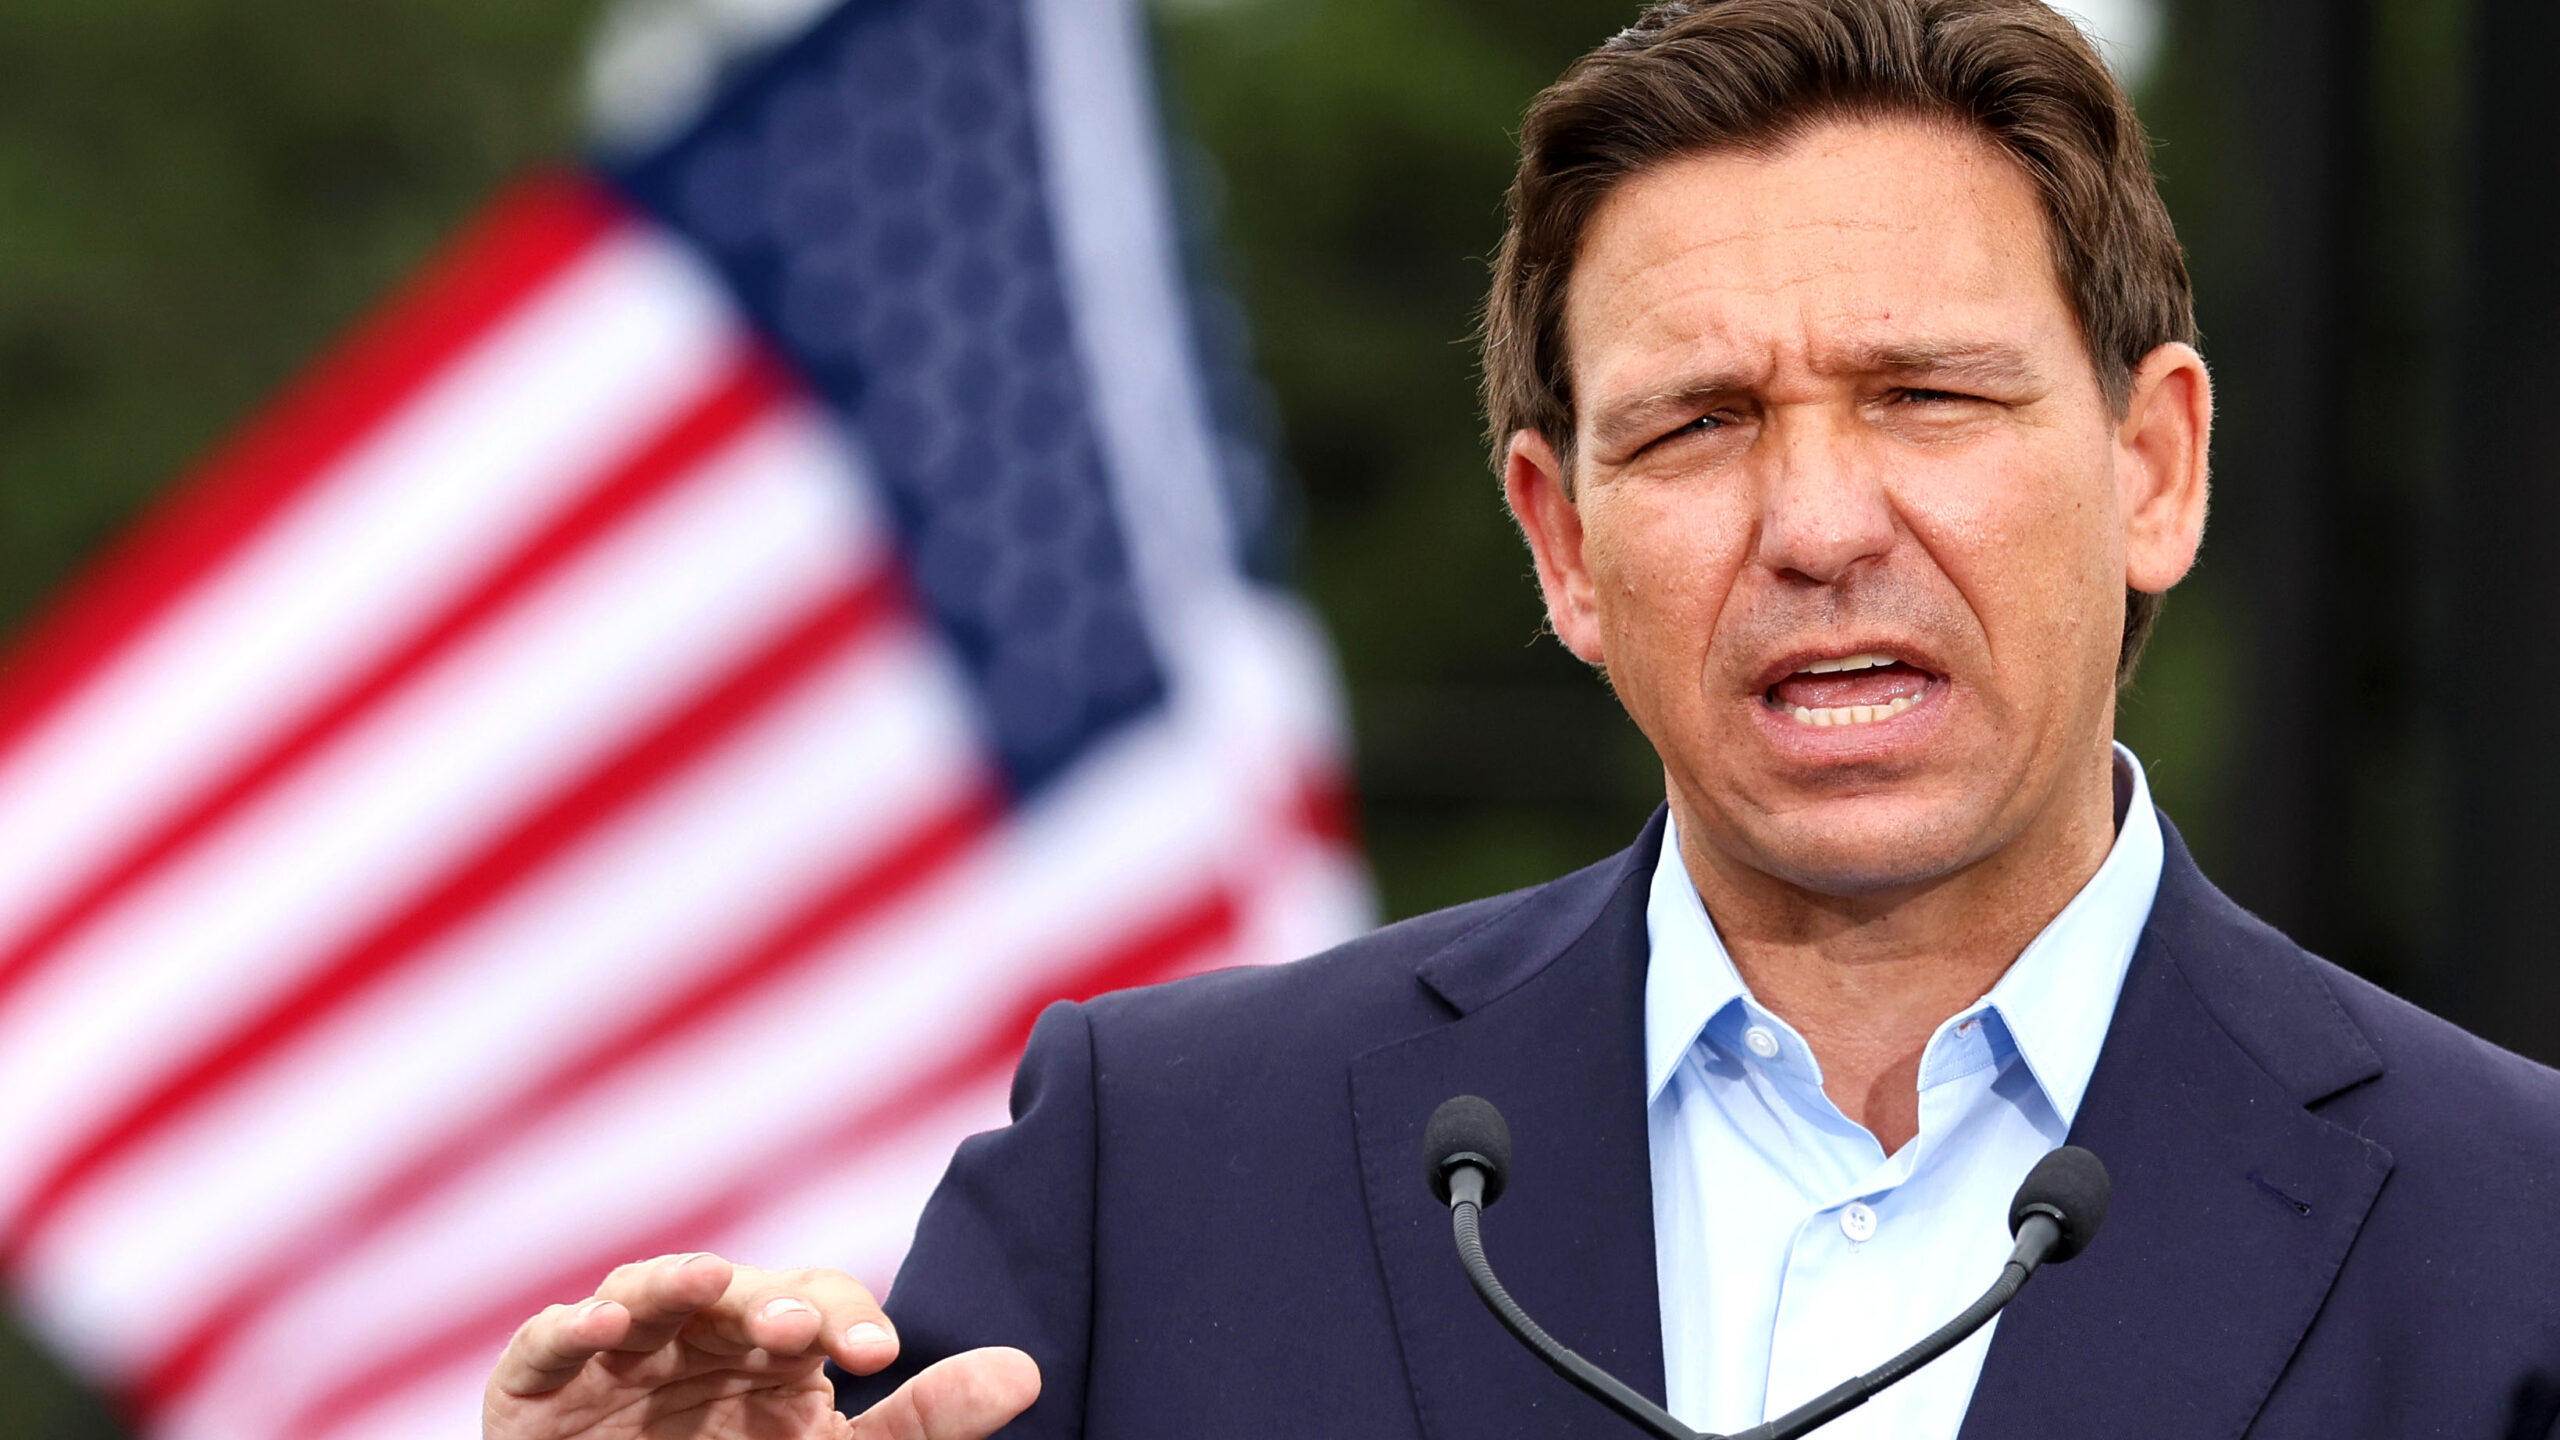 DeSantis prohibits lab-grown meat in Florida to support local ranchers and oppose WEF agenda